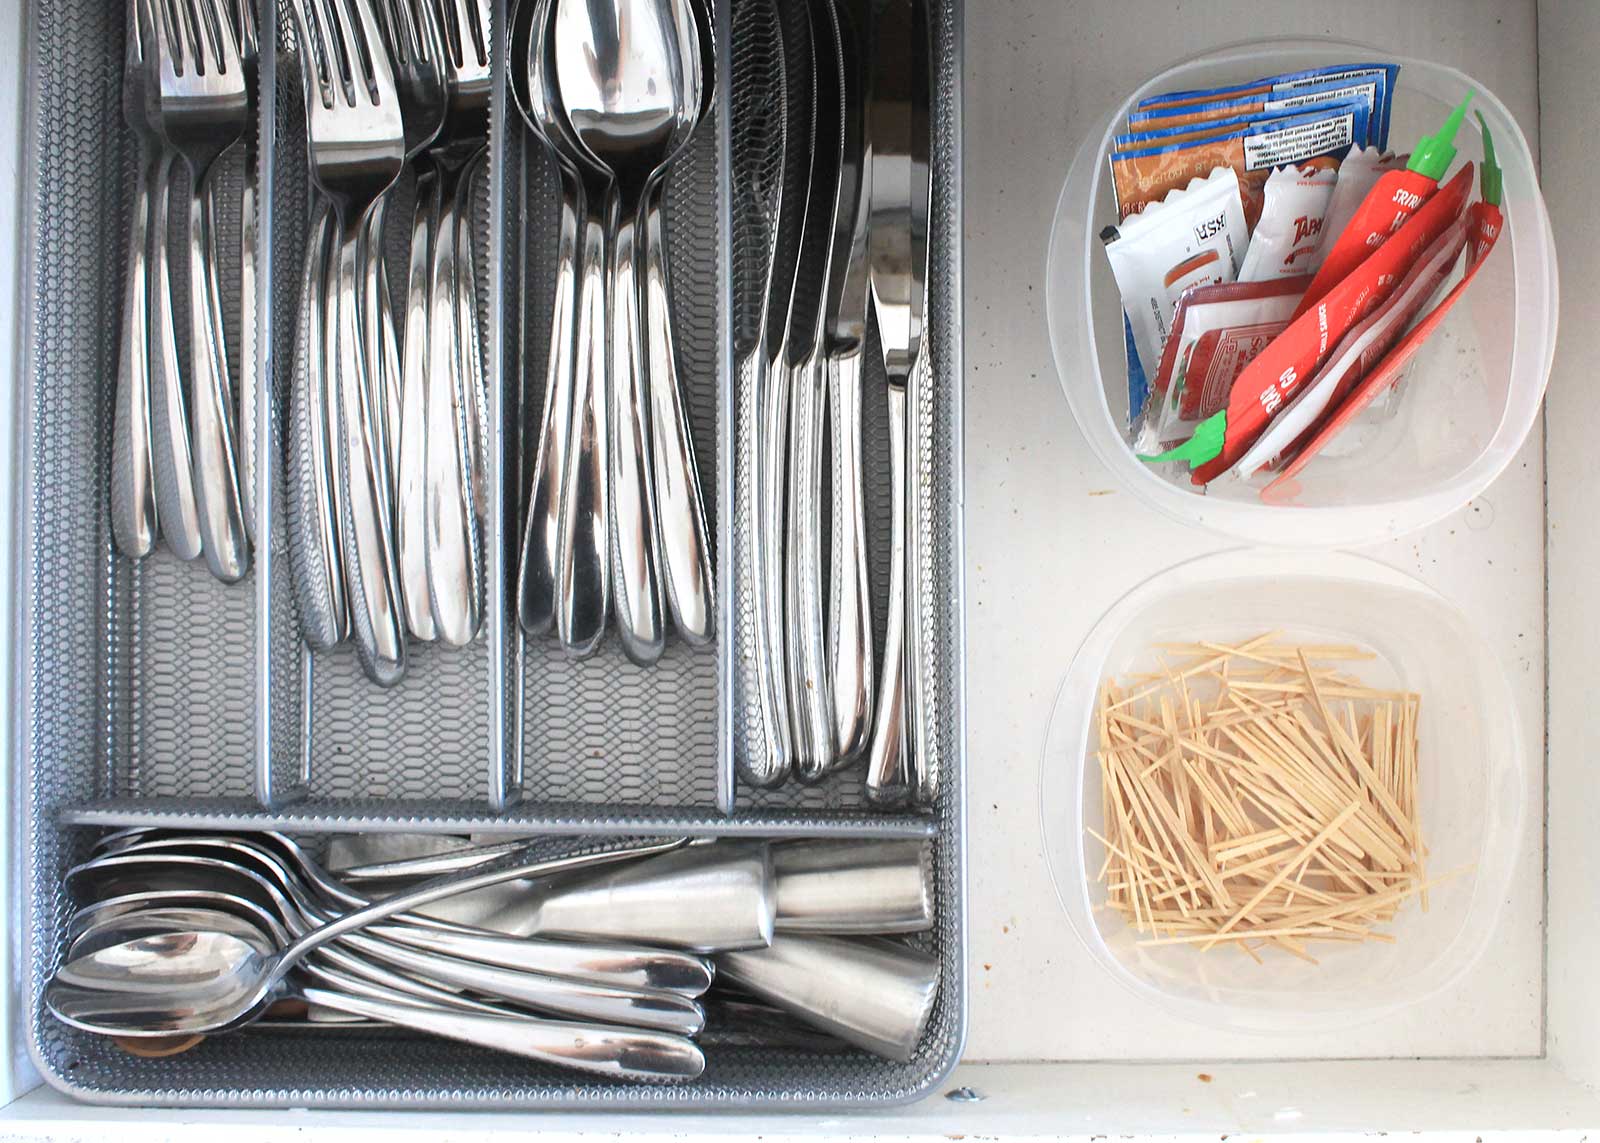 Repurpose plastic containers to store junk drawer items